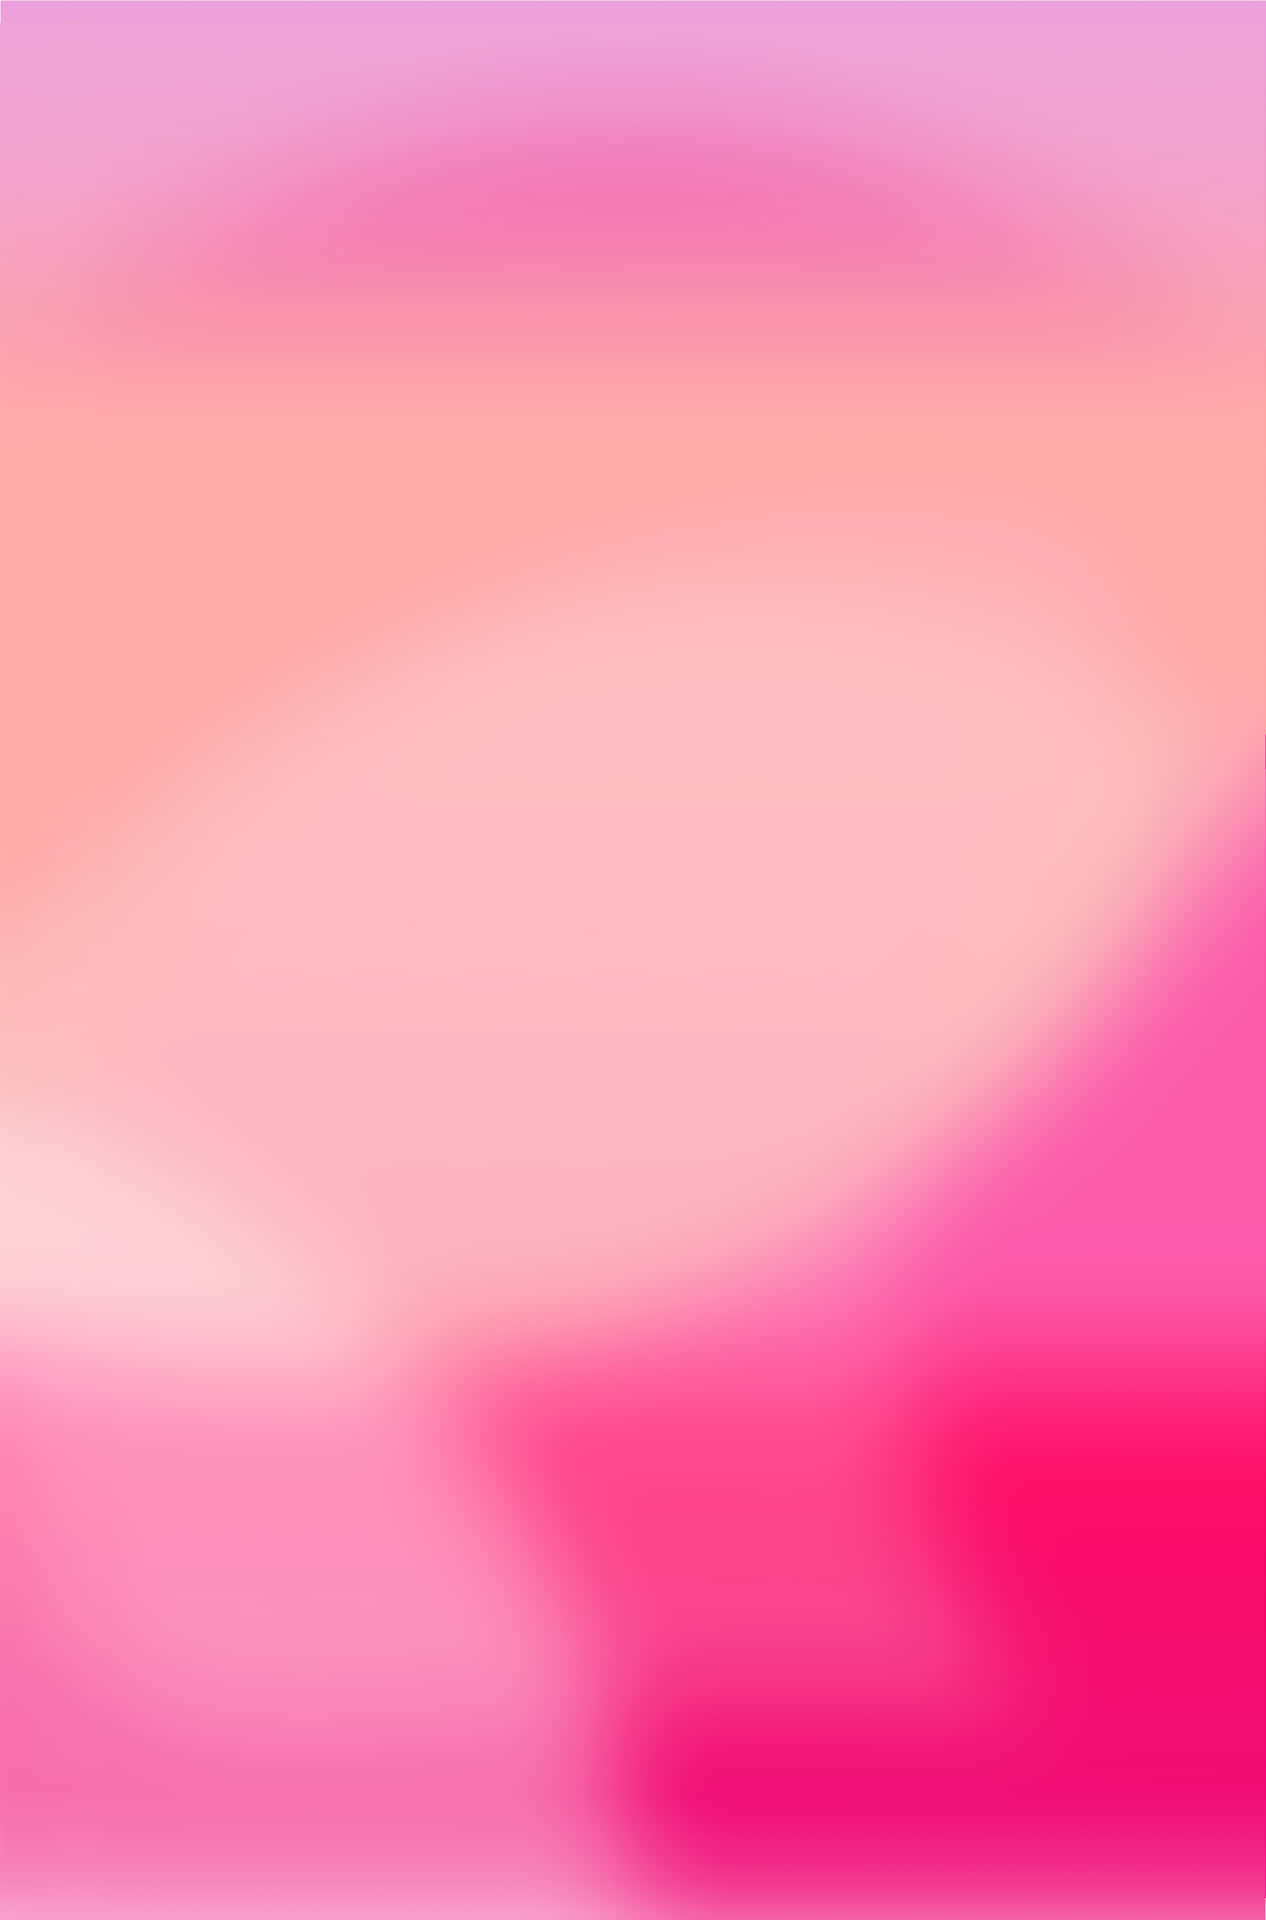 Download Bright Pink Background | Wallpapers.com